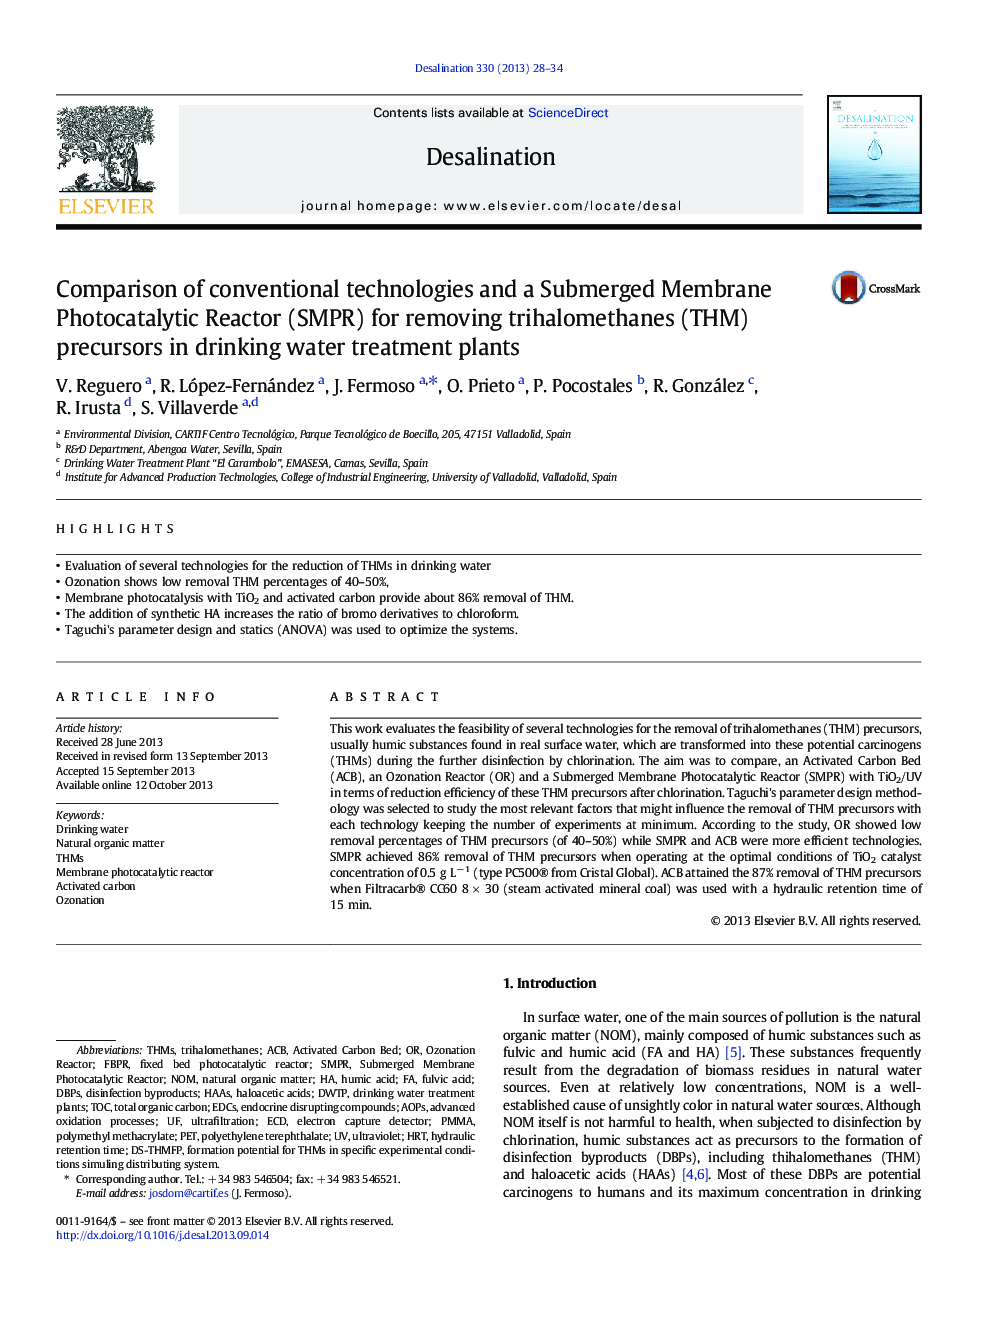 Comparison of conventional technologies and a Submerged Membrane Photocatalytic Reactor (SMPR) for removing trihalomethanes (THM) precursors in drinking water treatment plants